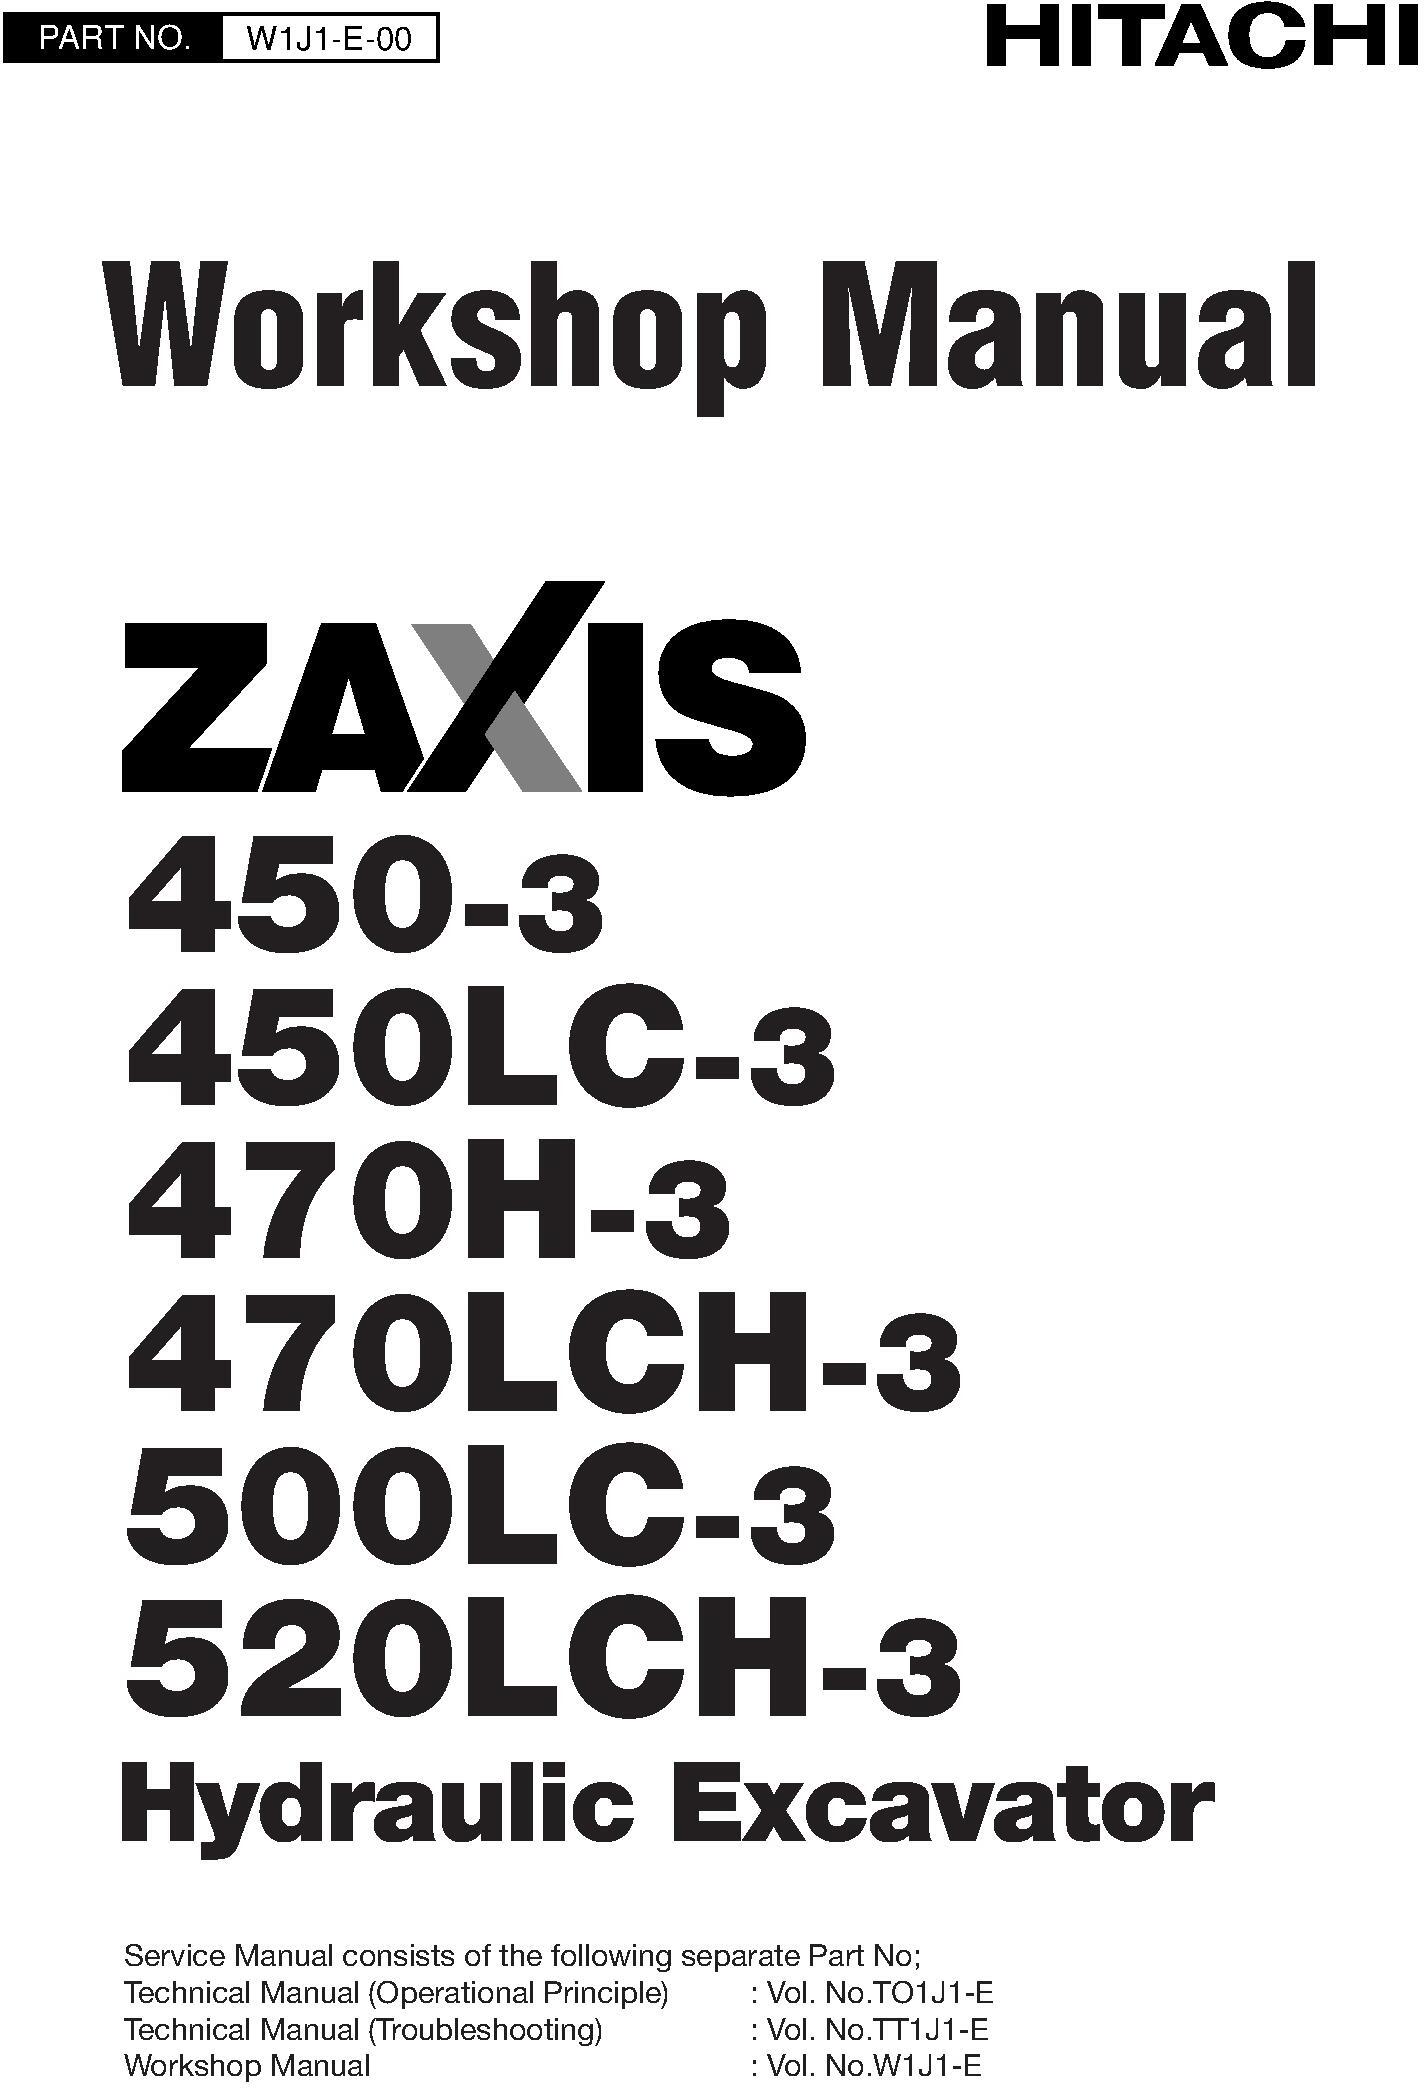 Hitachi Zaxis 450-3, 450LC-3, 470H-3, 470LCH-3, 500LC-3, 520LCH-3 Excavator Workshop Service Manual - 18912